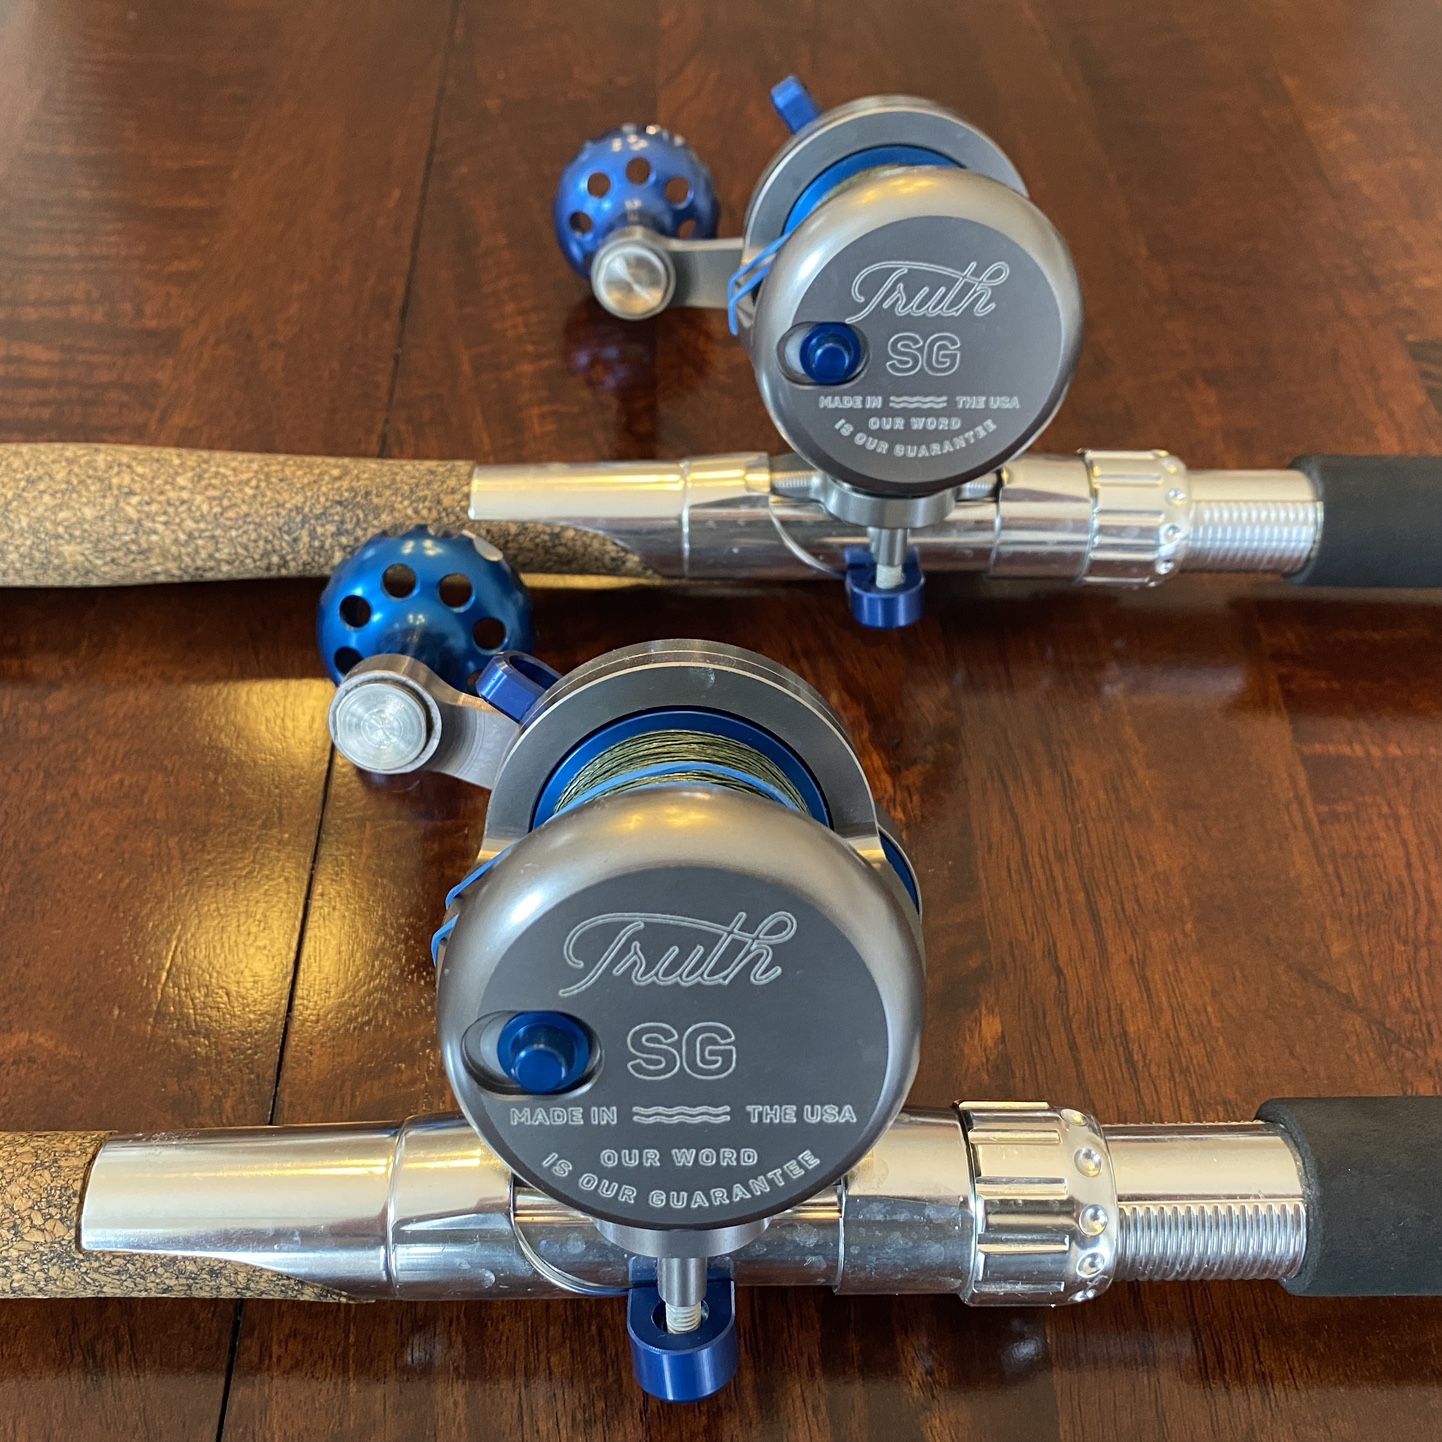 Truth (Seigler) SG Lever Drag Fishing Reels - Blue/Silver for Sale